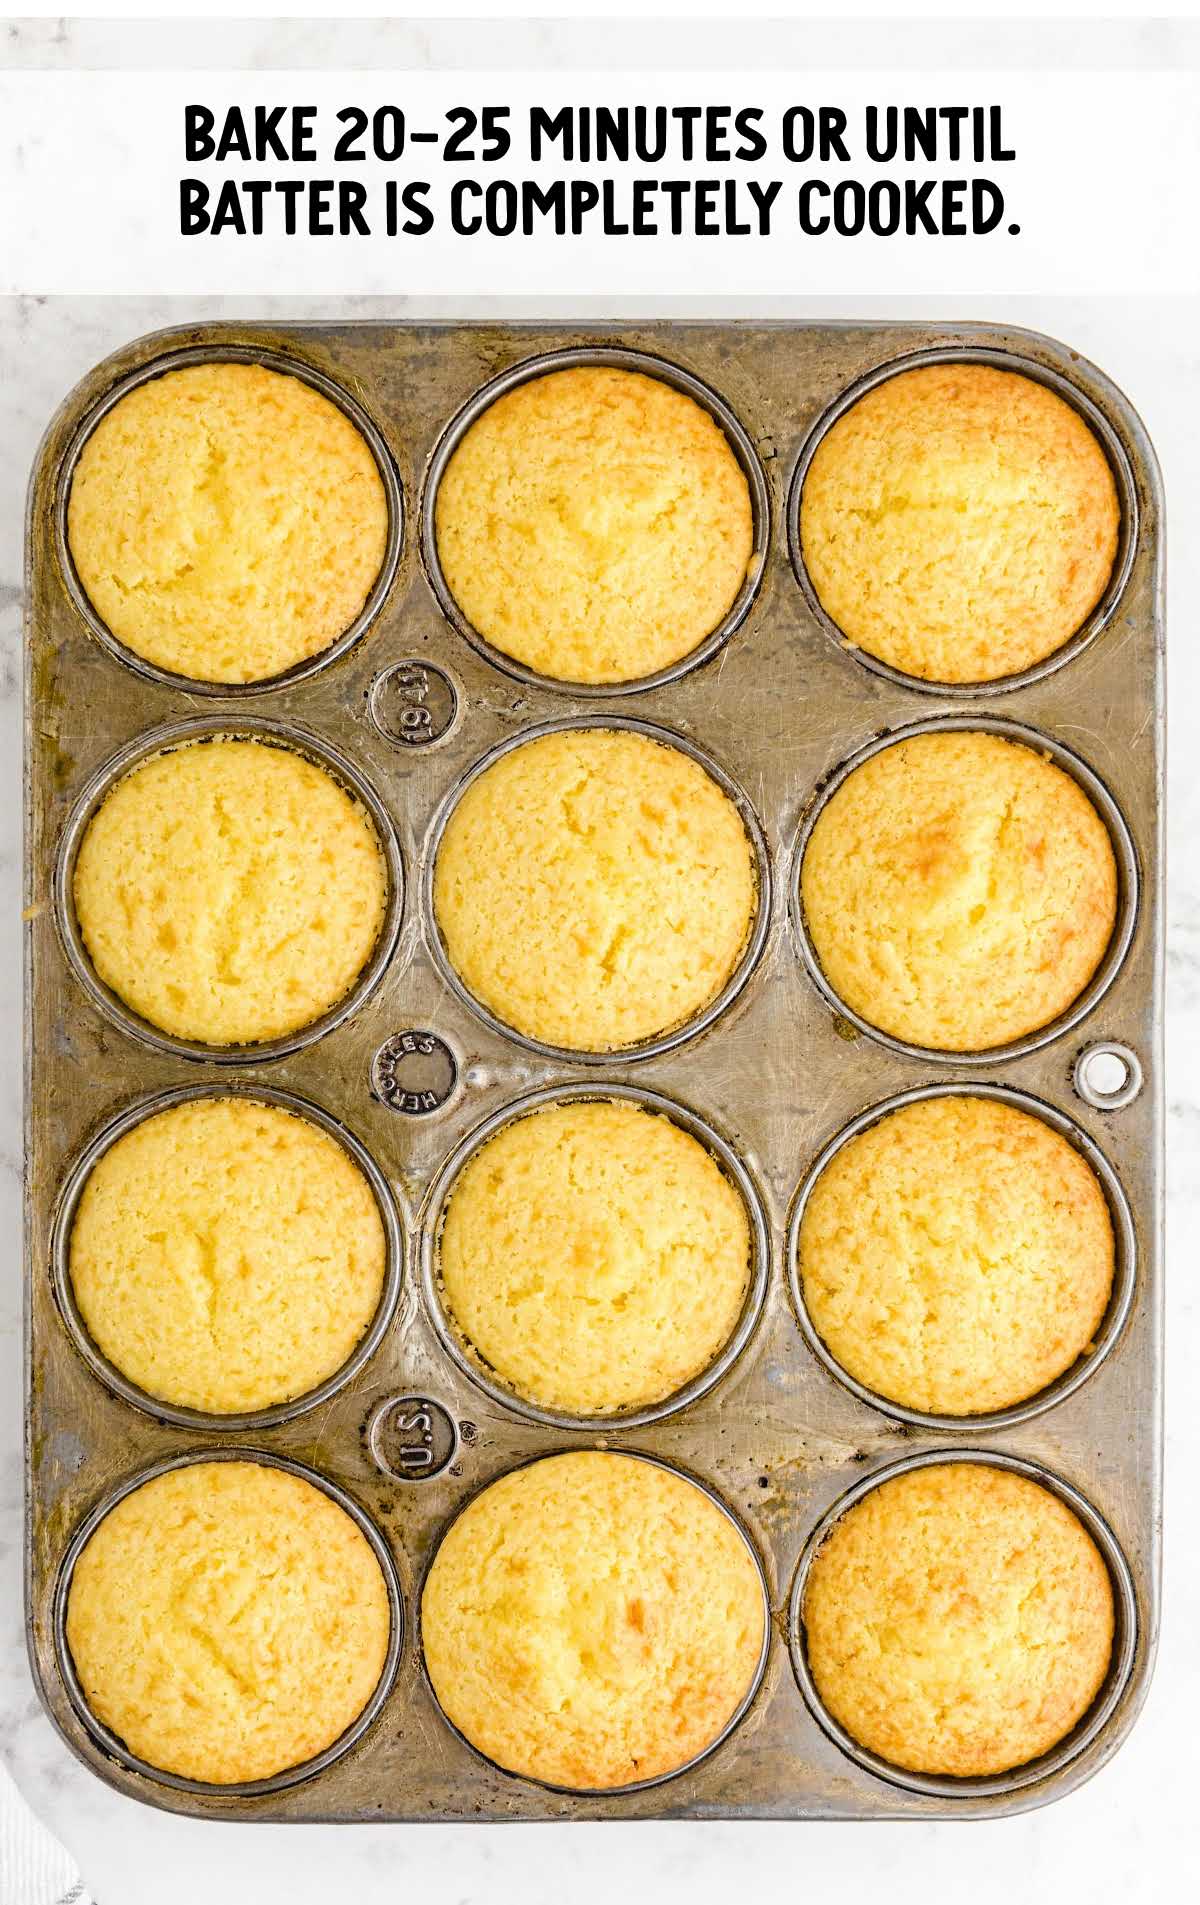 bake muffins for 20-25 minutes 